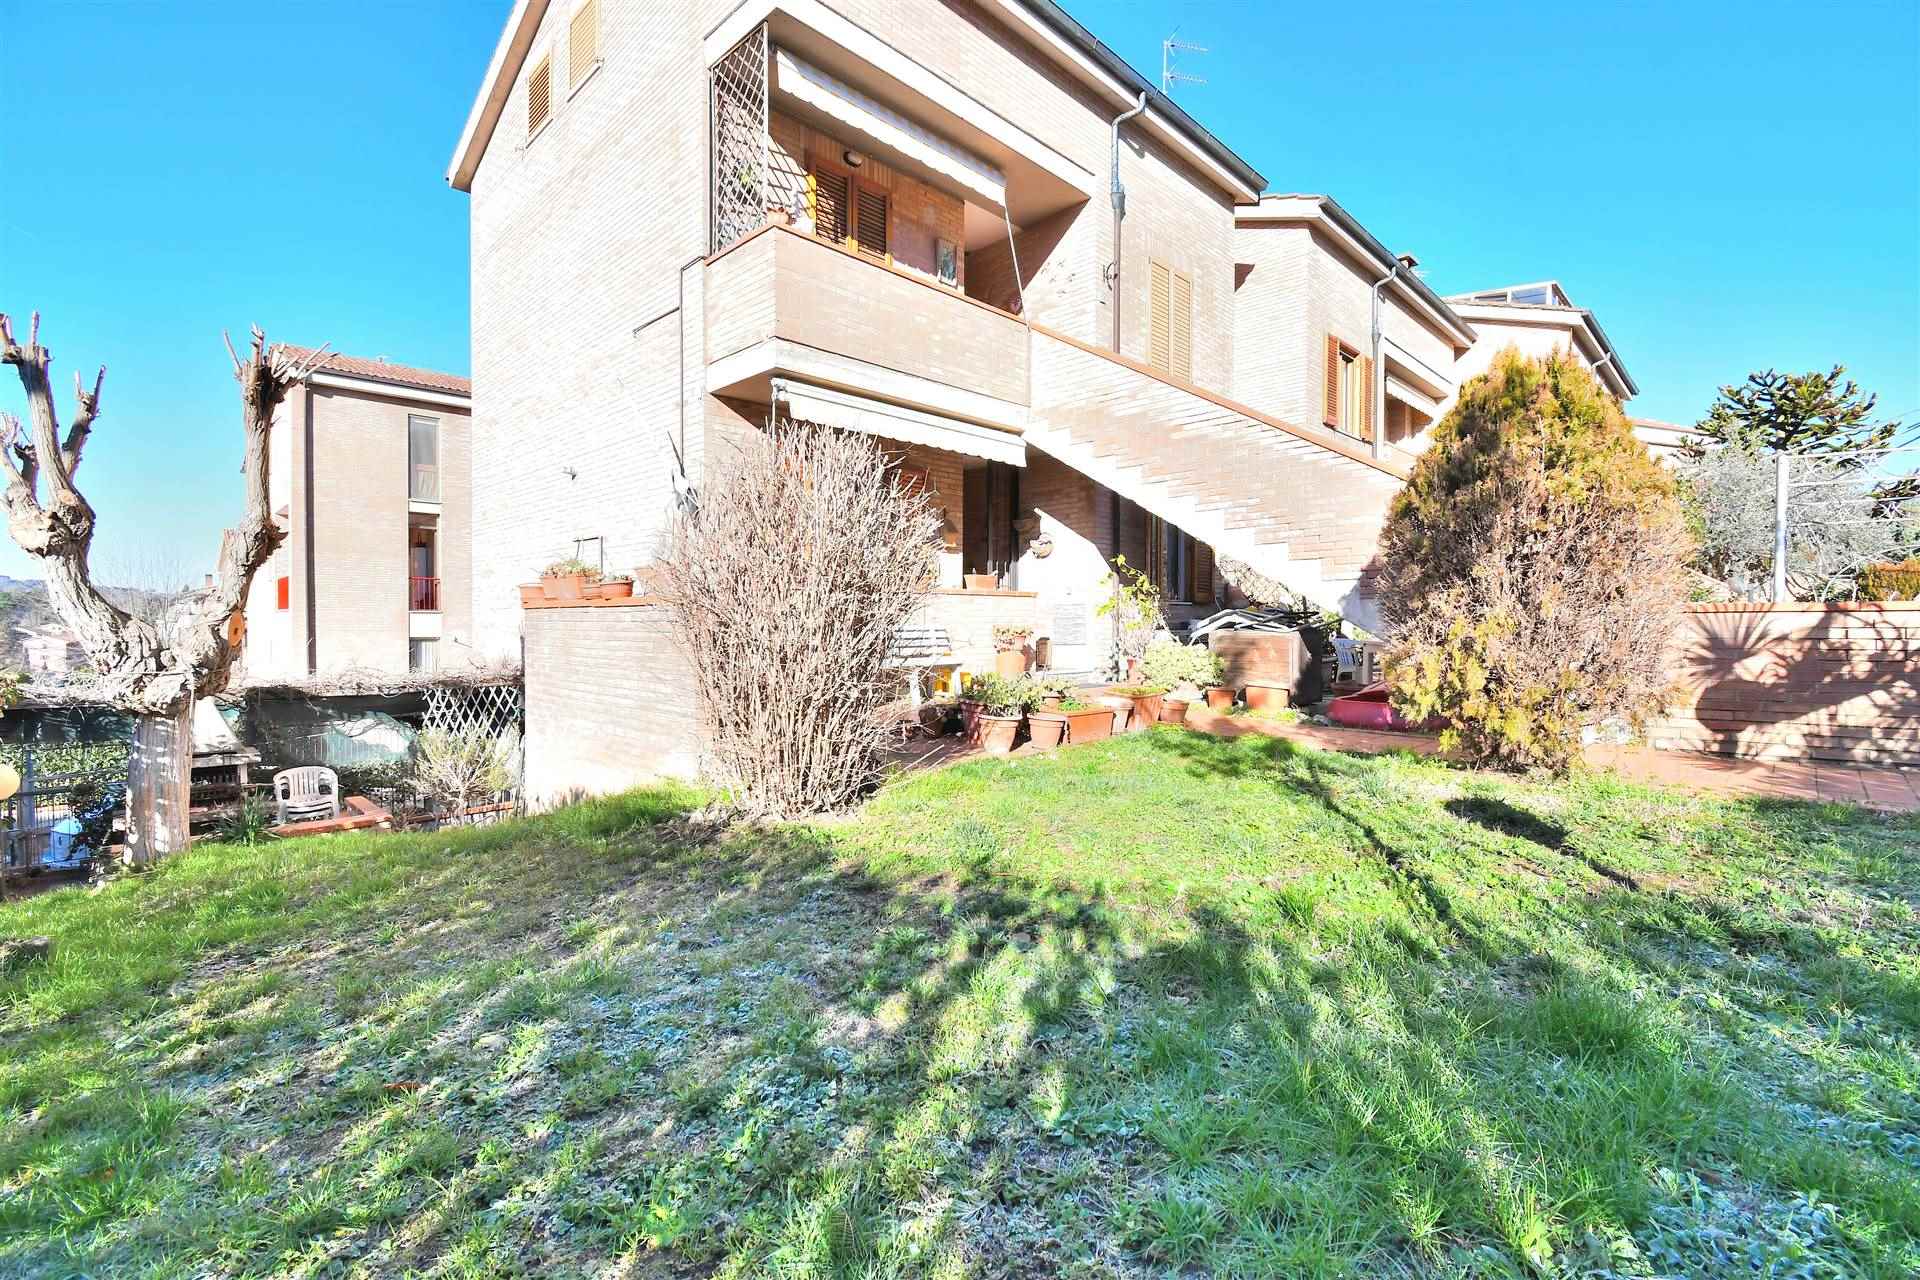 PONTE A BOZZONE, CASTELNUOVO BERARDENGA, Apartment for sale of 81 Sq. mt., Good condition, Heating Individual heating system, Energetic class: F, 